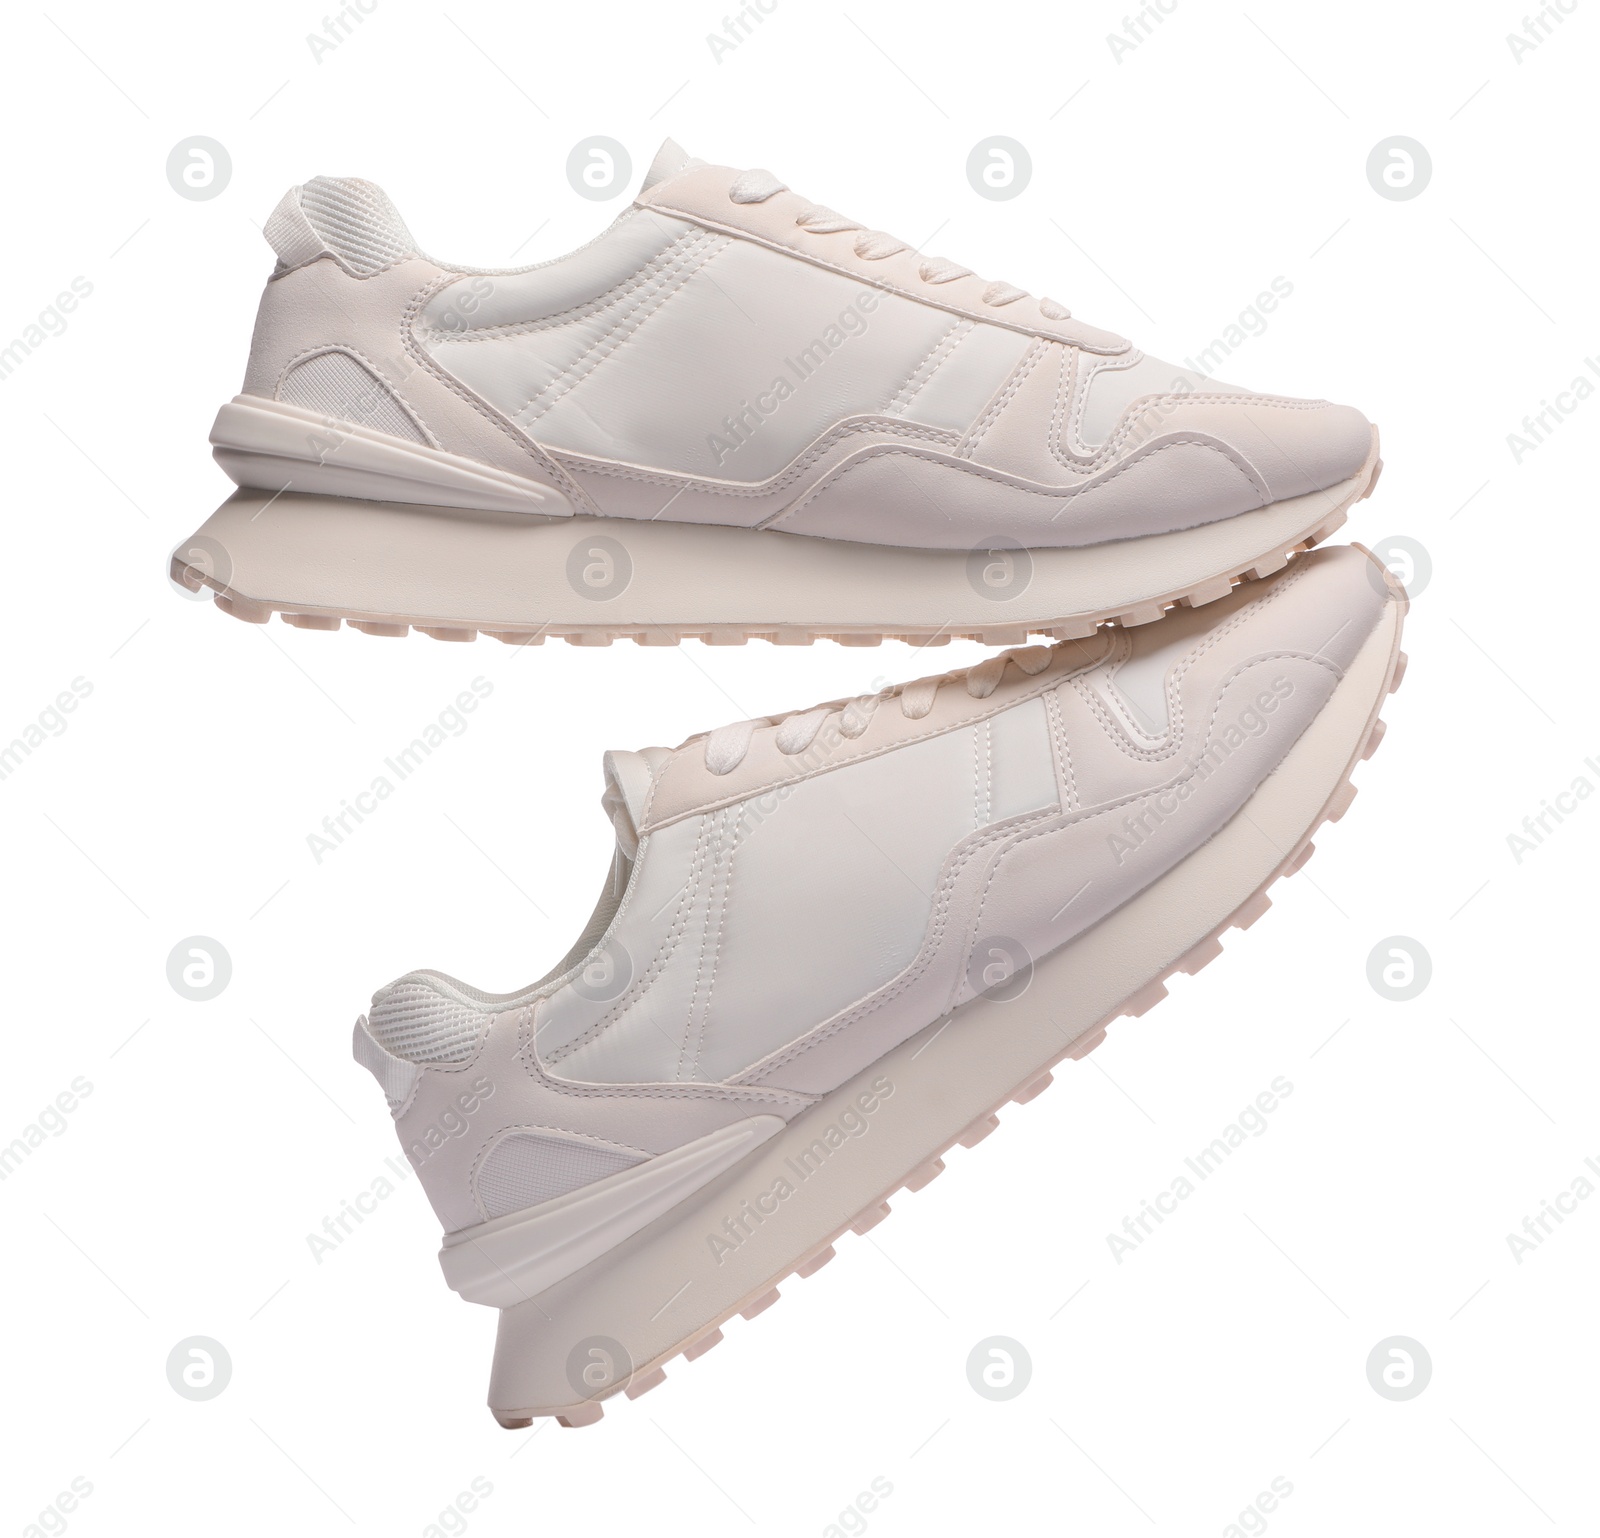 Photo of Pair of stylish sneakers isolated on white